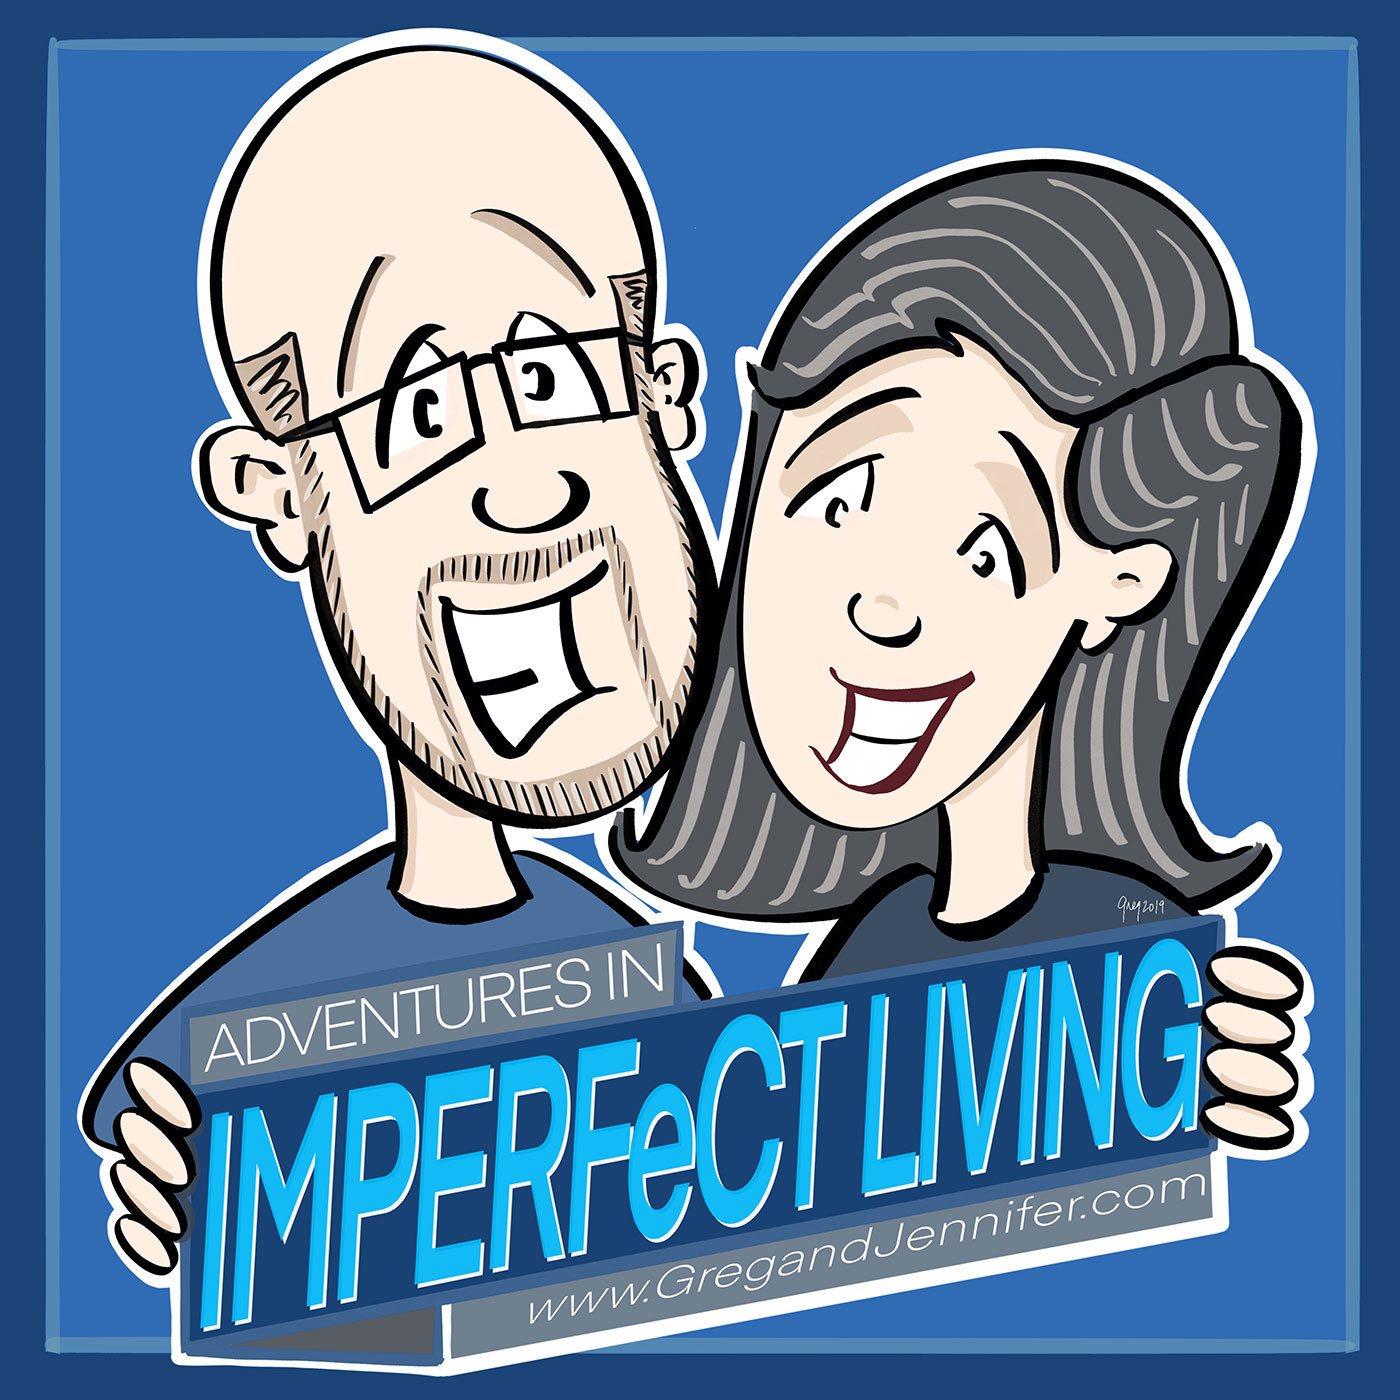 Adventures in Imperfect Living